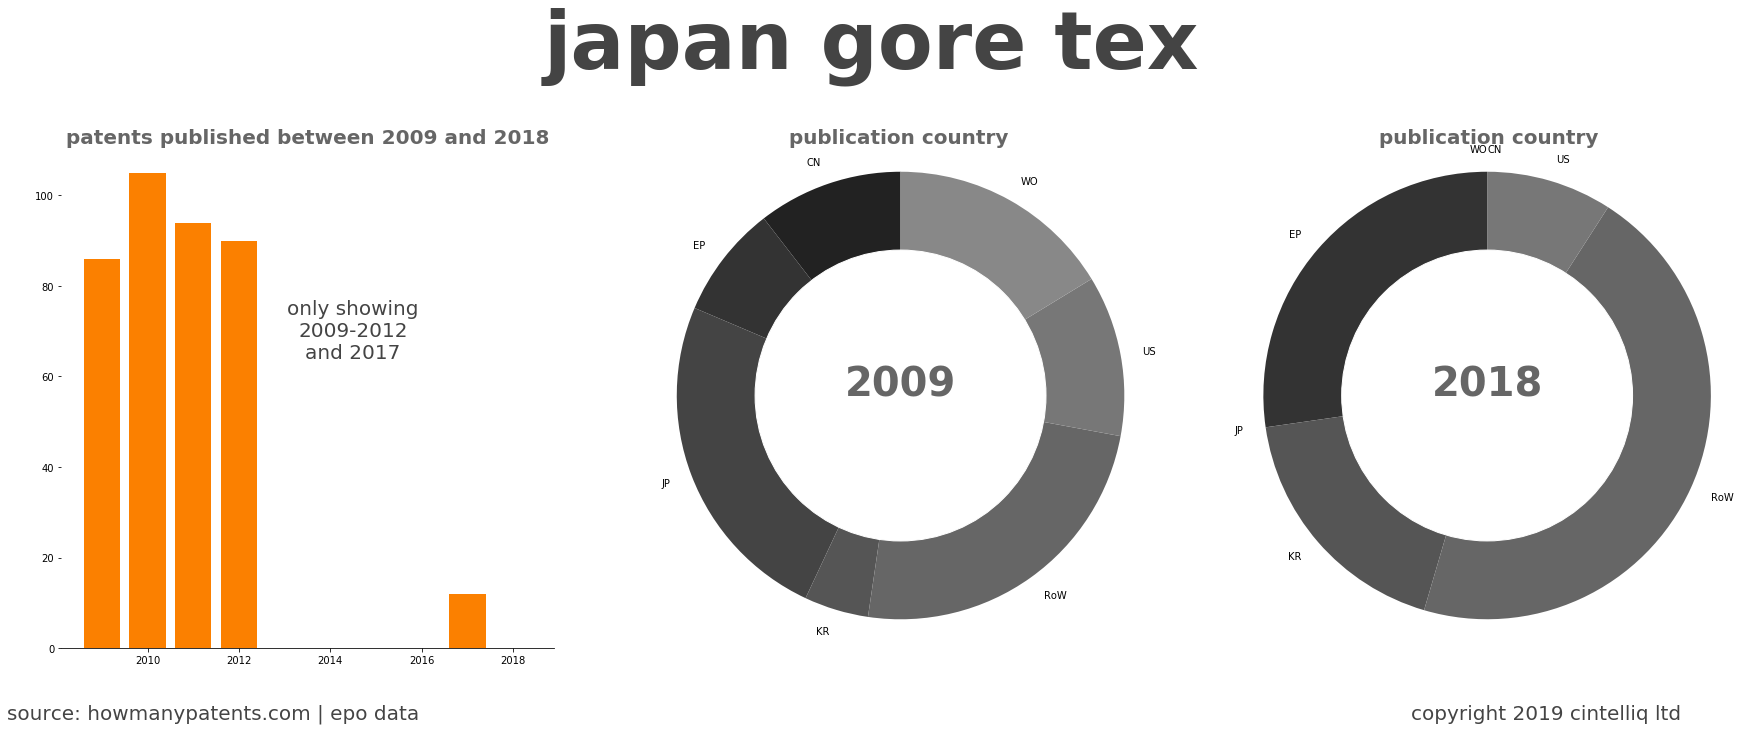 summary of patents for Japan Gore Tex